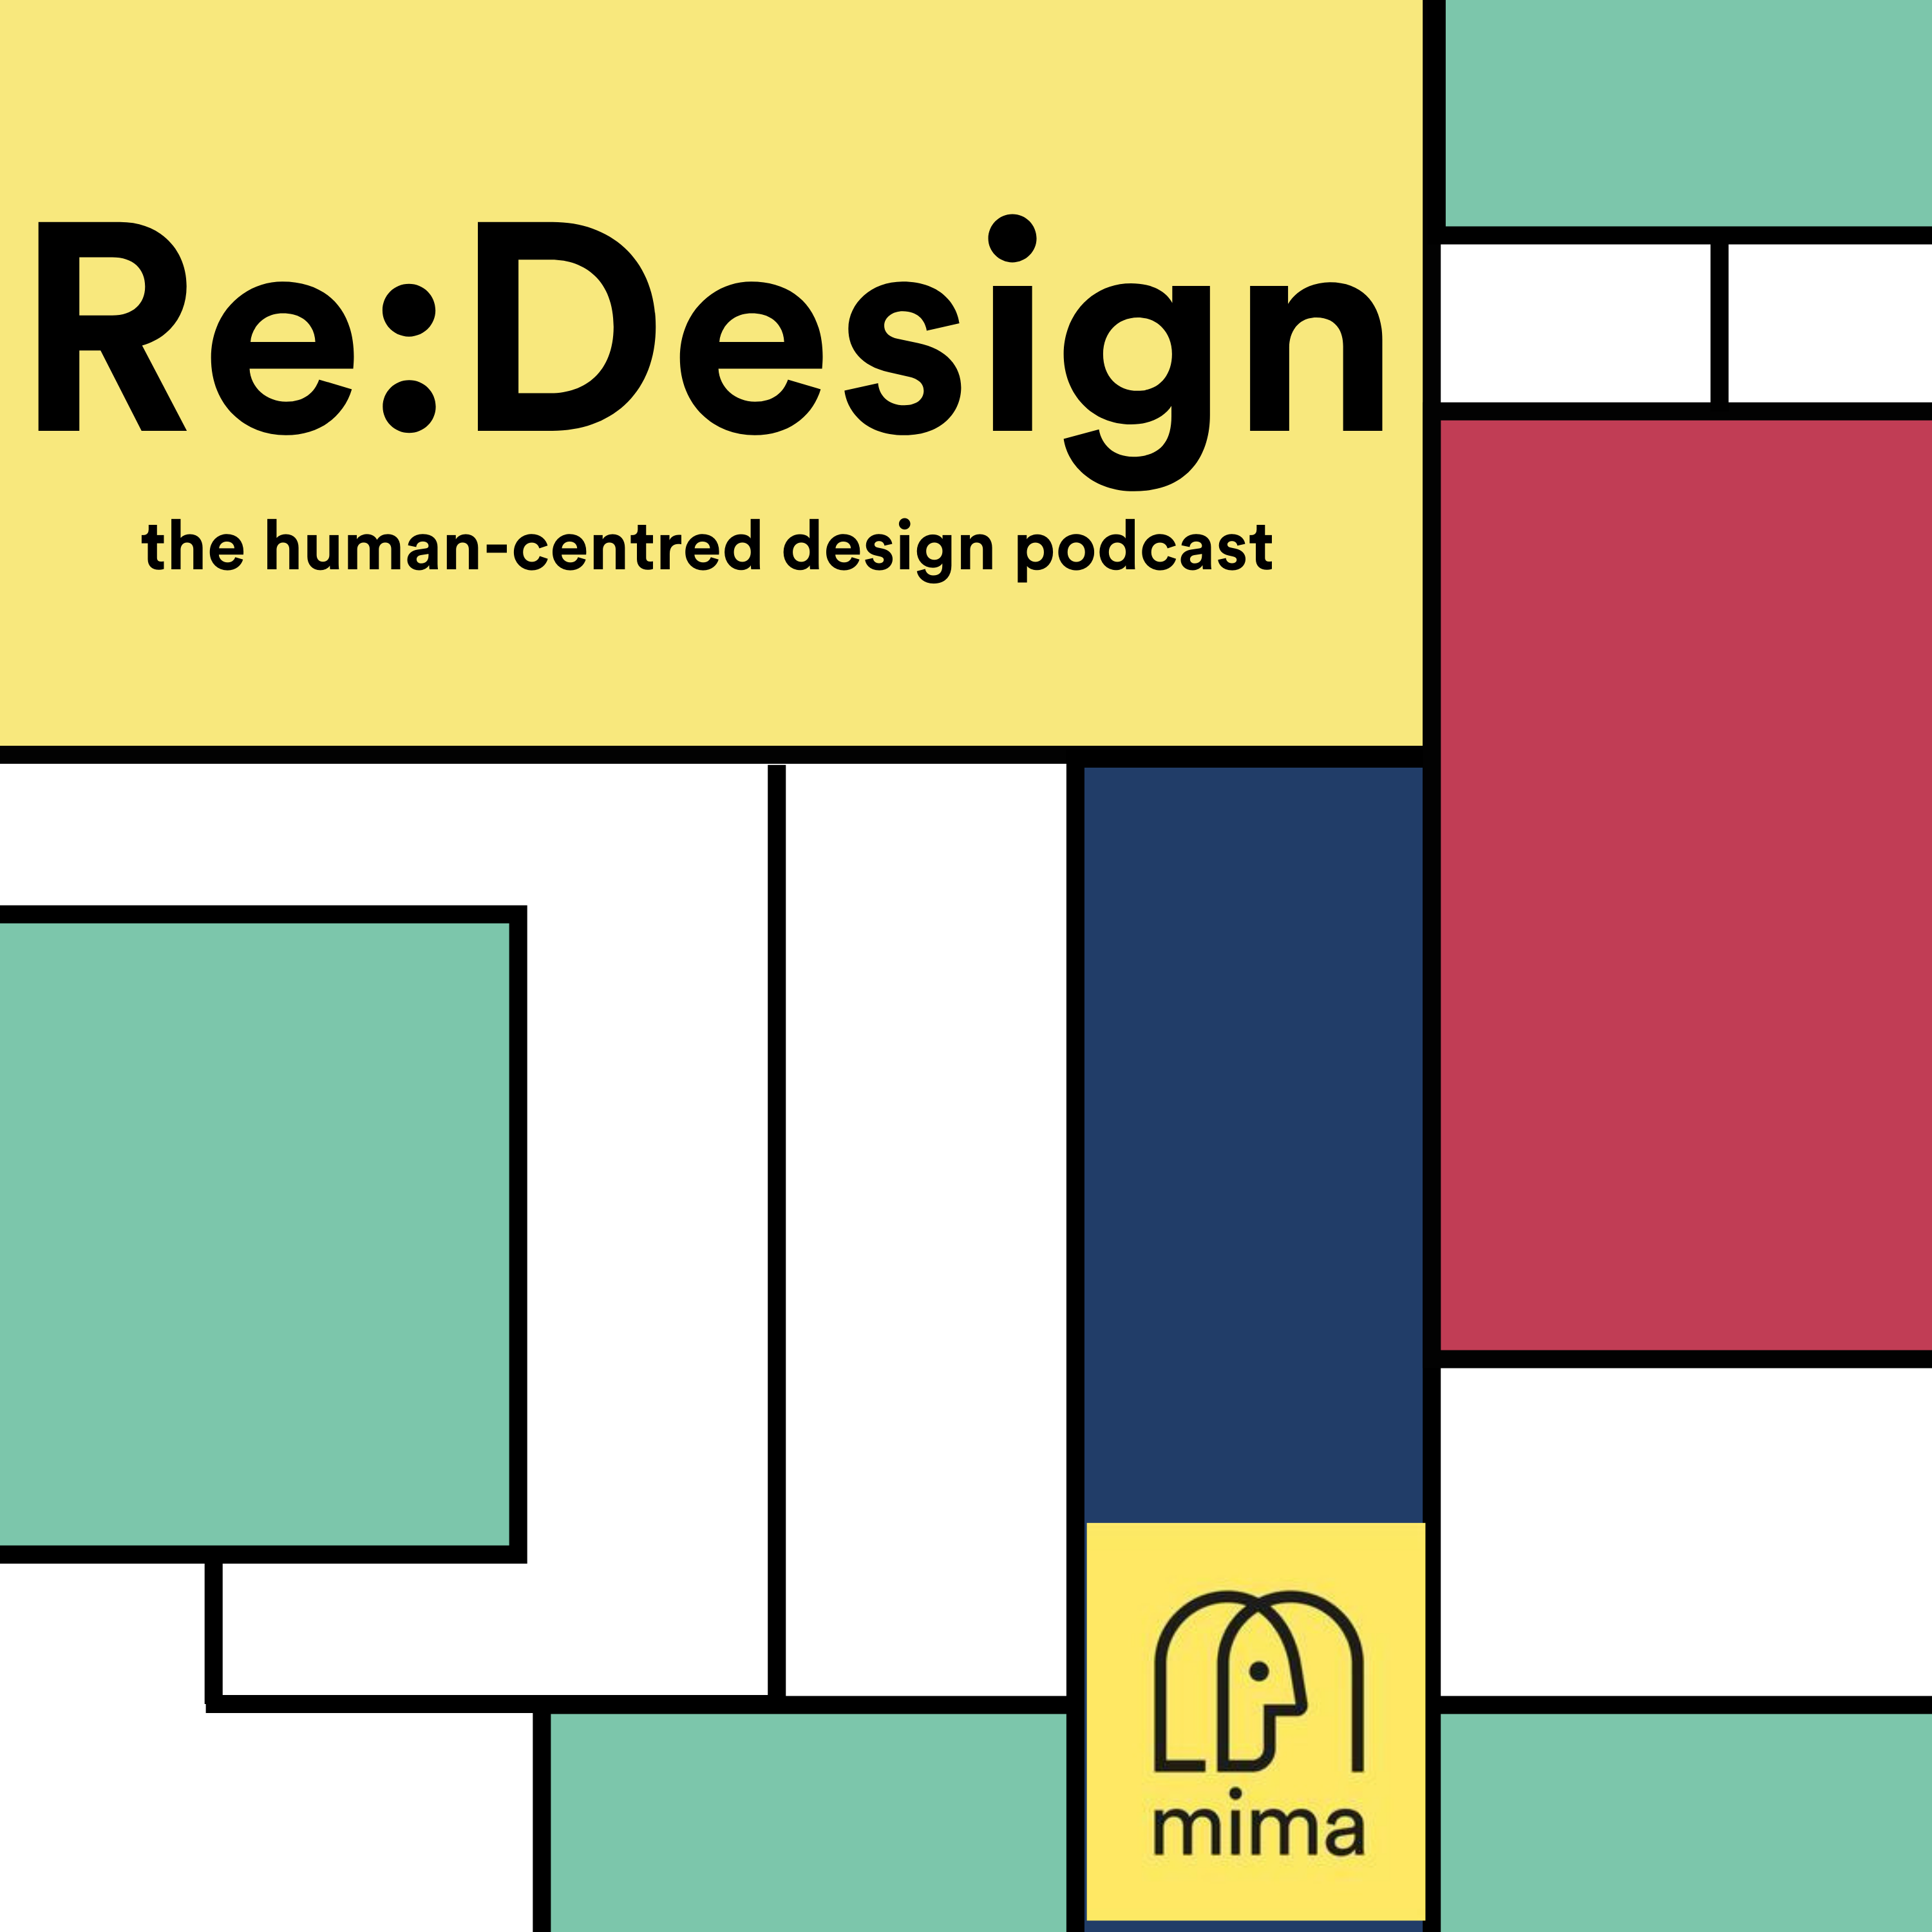 Re:Design - the human-centred design podcast